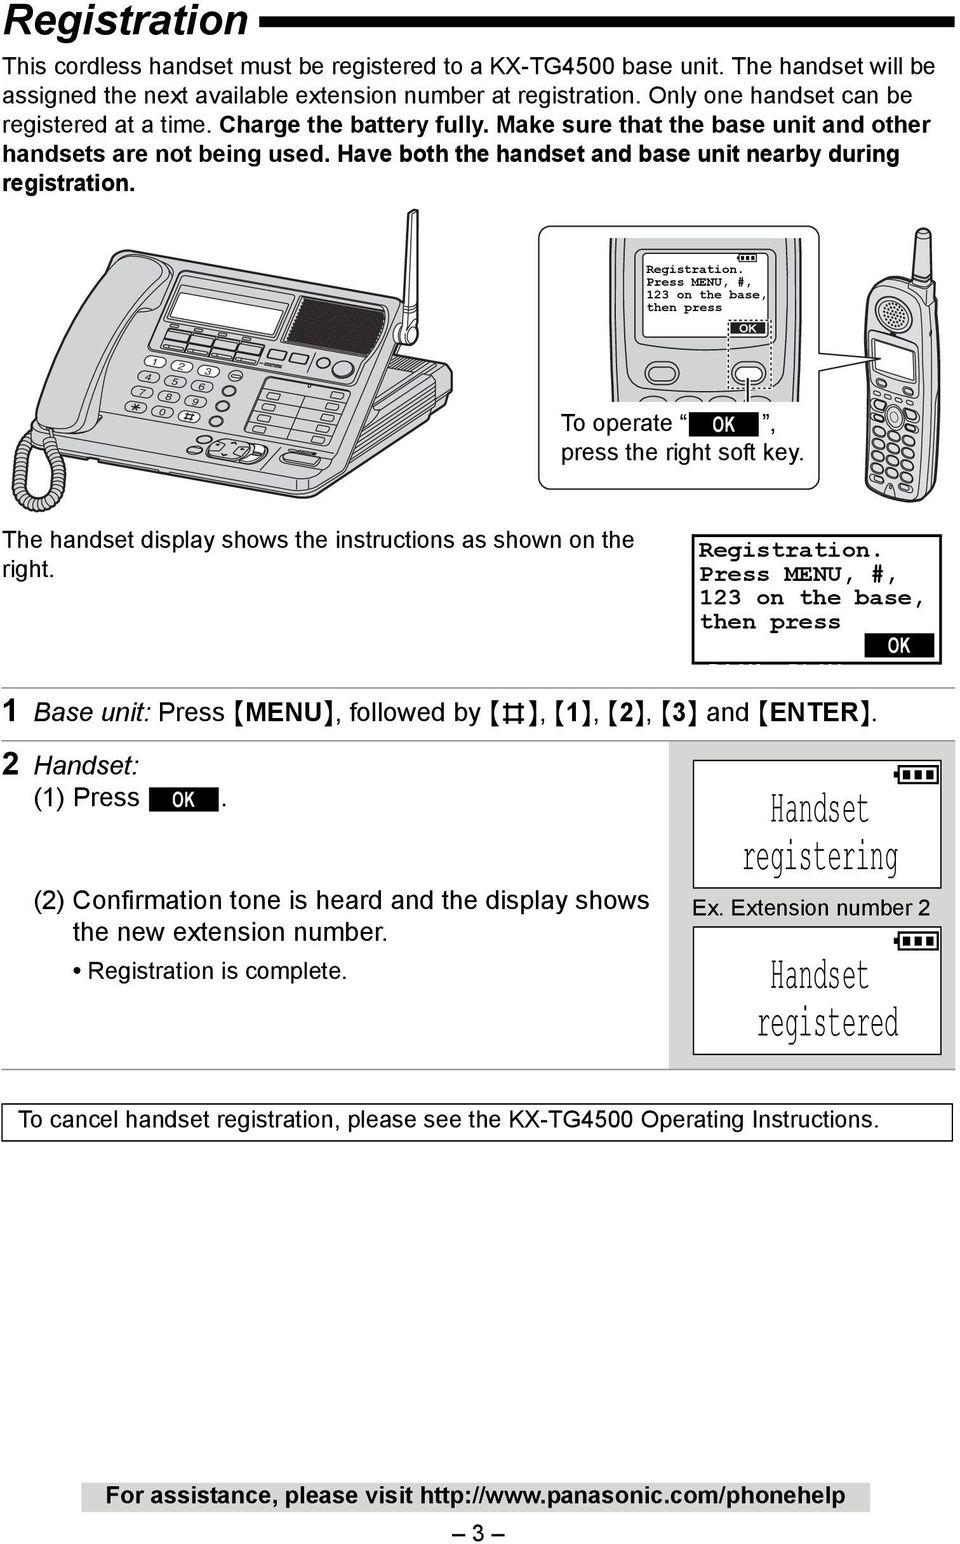 Have both the handset and base unit nearby during registration. 1 Registration. Press MENU, #, 123 on the base, then press BACK OK 7 8 9 0 To operate OK, press the right soft key.